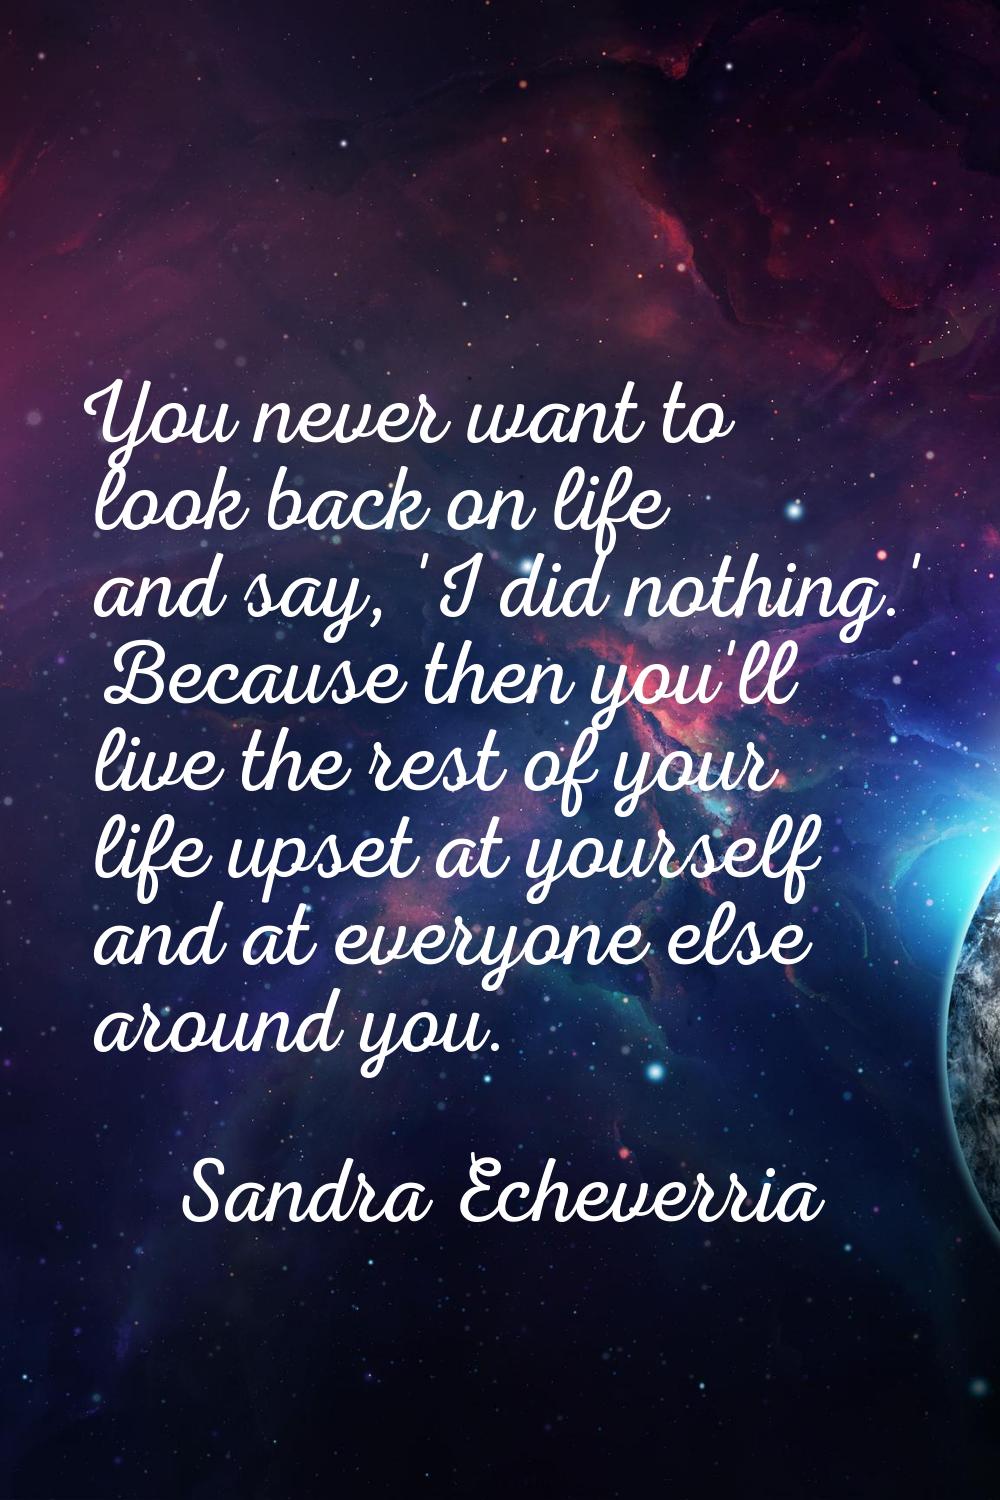 You never want to look back on life and say, 'I did nothing.' Because then you'll live the rest of 